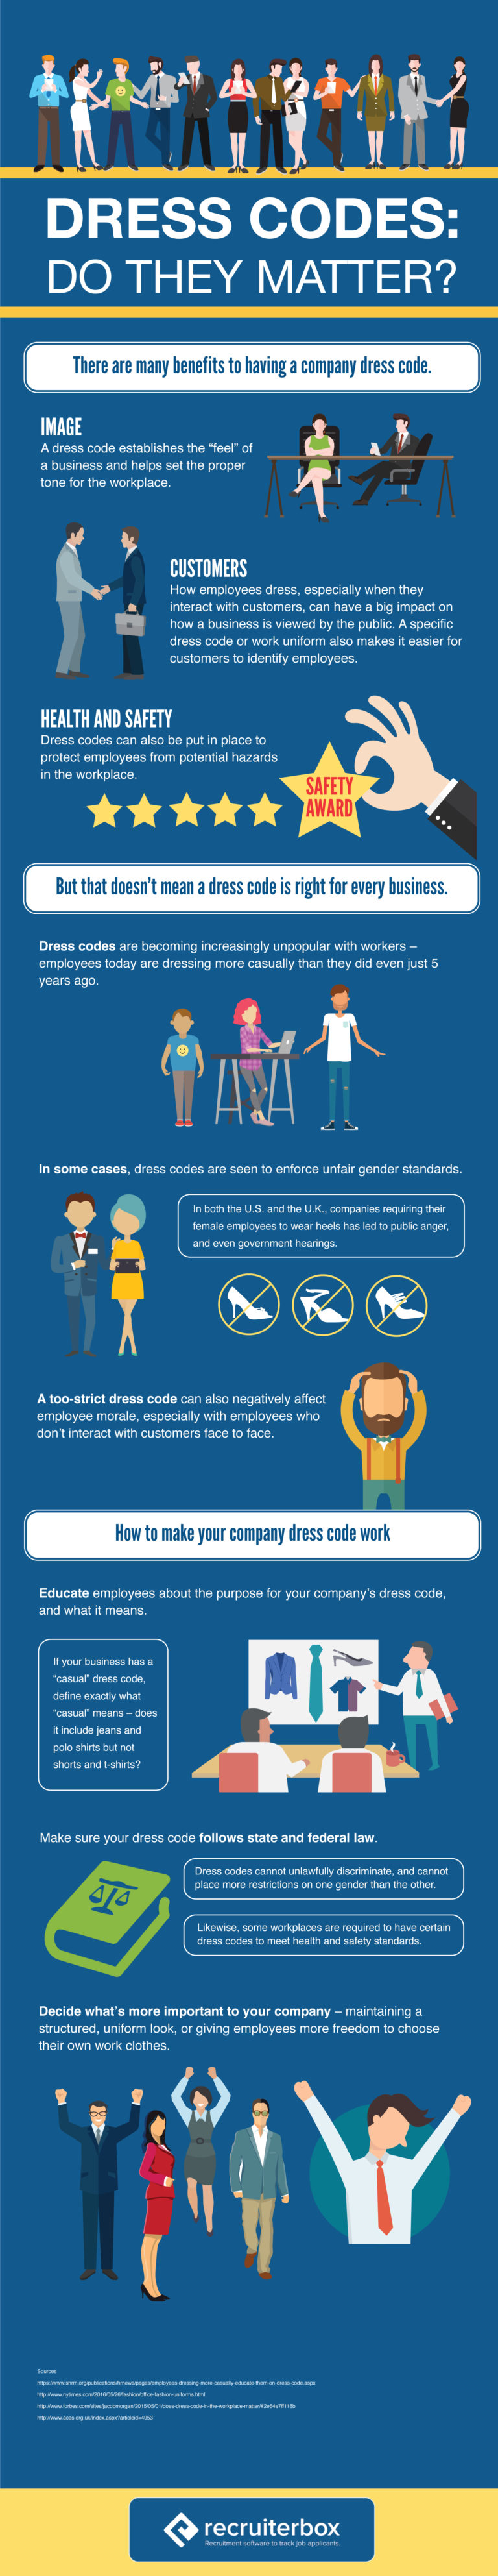 Dress Codes: Do They Matter? [Infographic]